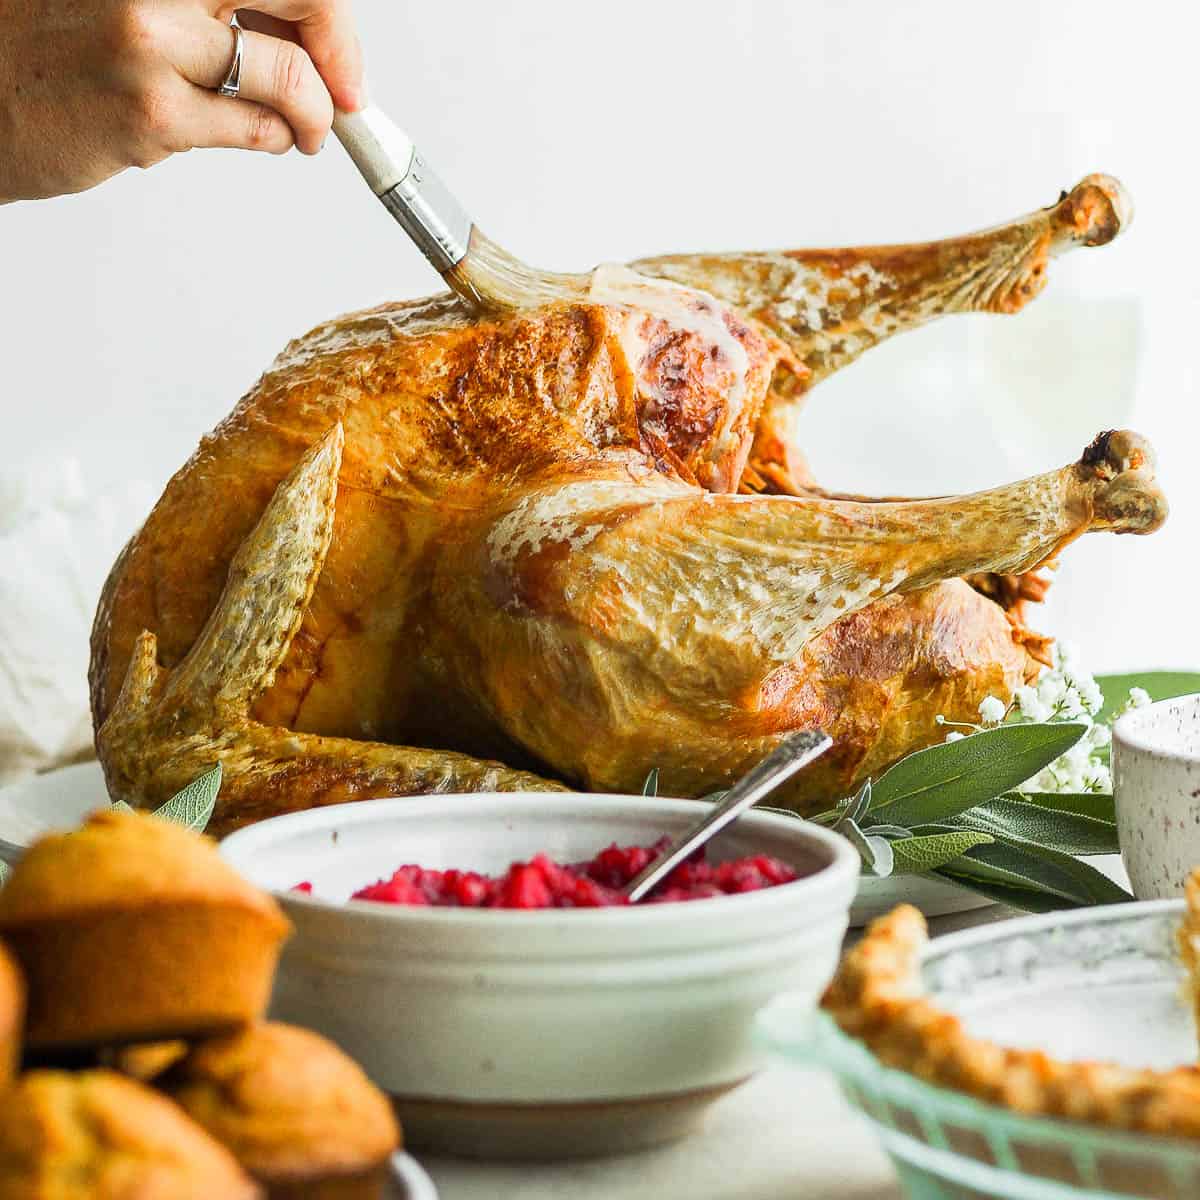 https://thewoodenskillet.com/wp-content/uploads/2016/11/how-to-deep-fry-a-turkey-recipe-1-1.jpg